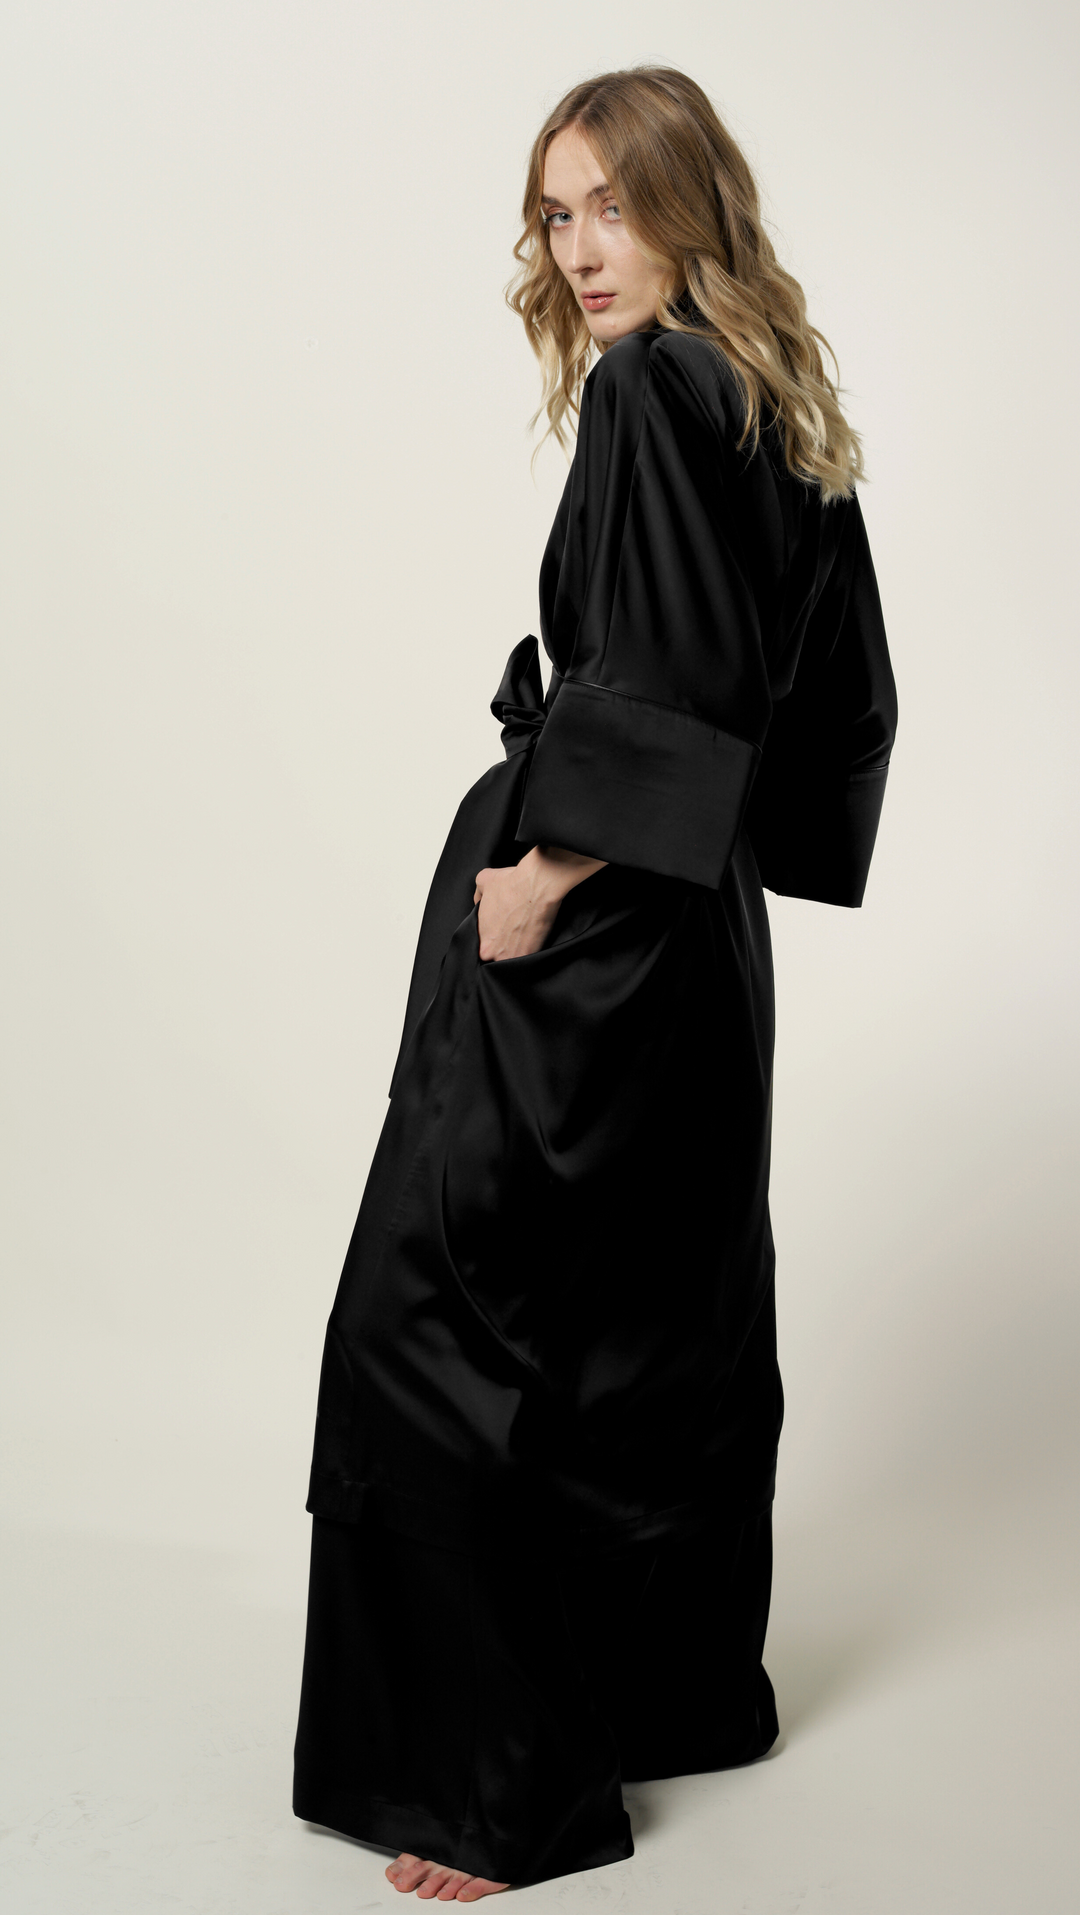 Black Morning Robe BeaA - Be At Home with Yourself